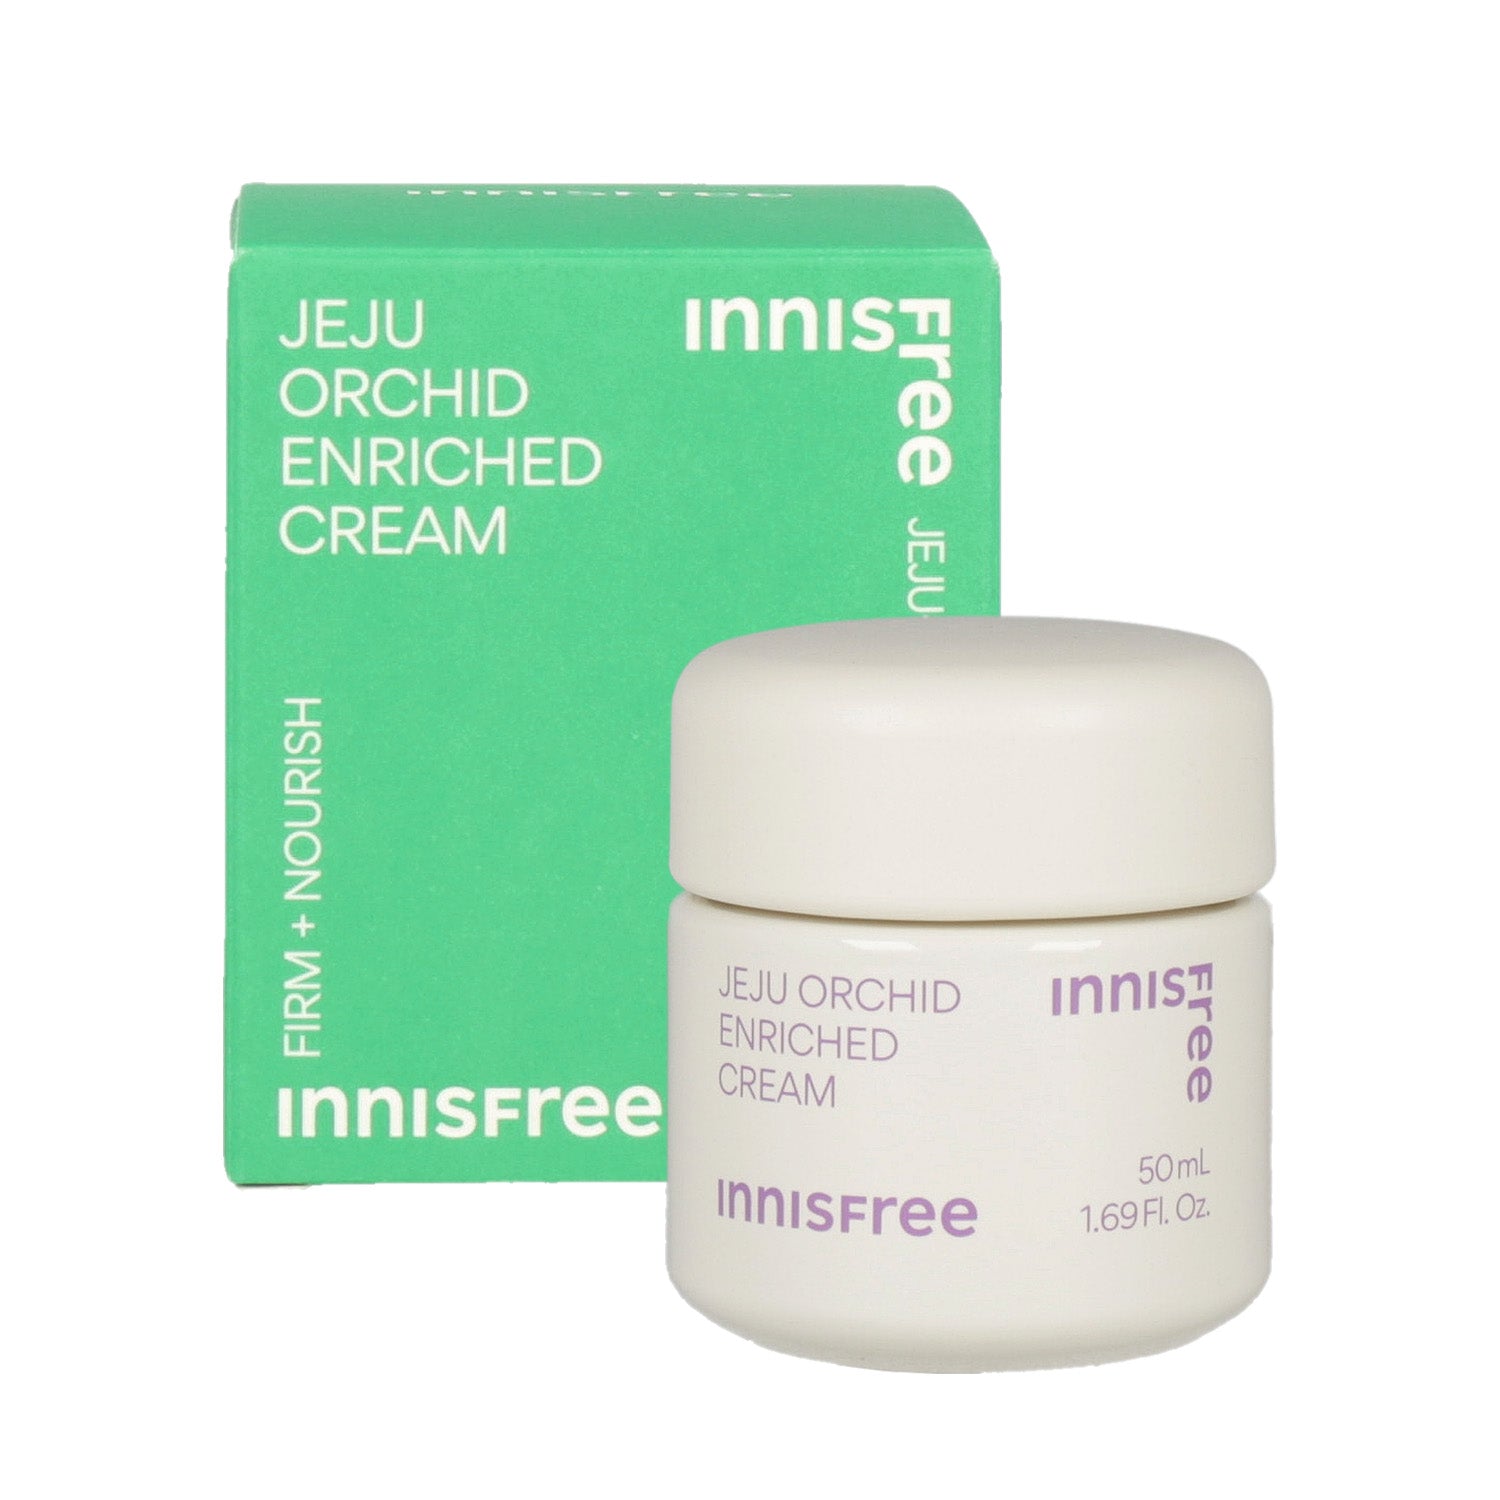 The Innisfree Jeju Orchid Enriched Cream 50ml is a luxurious and nourishing moisturizer designed to provide intense hydration and anti-aging benefits. 